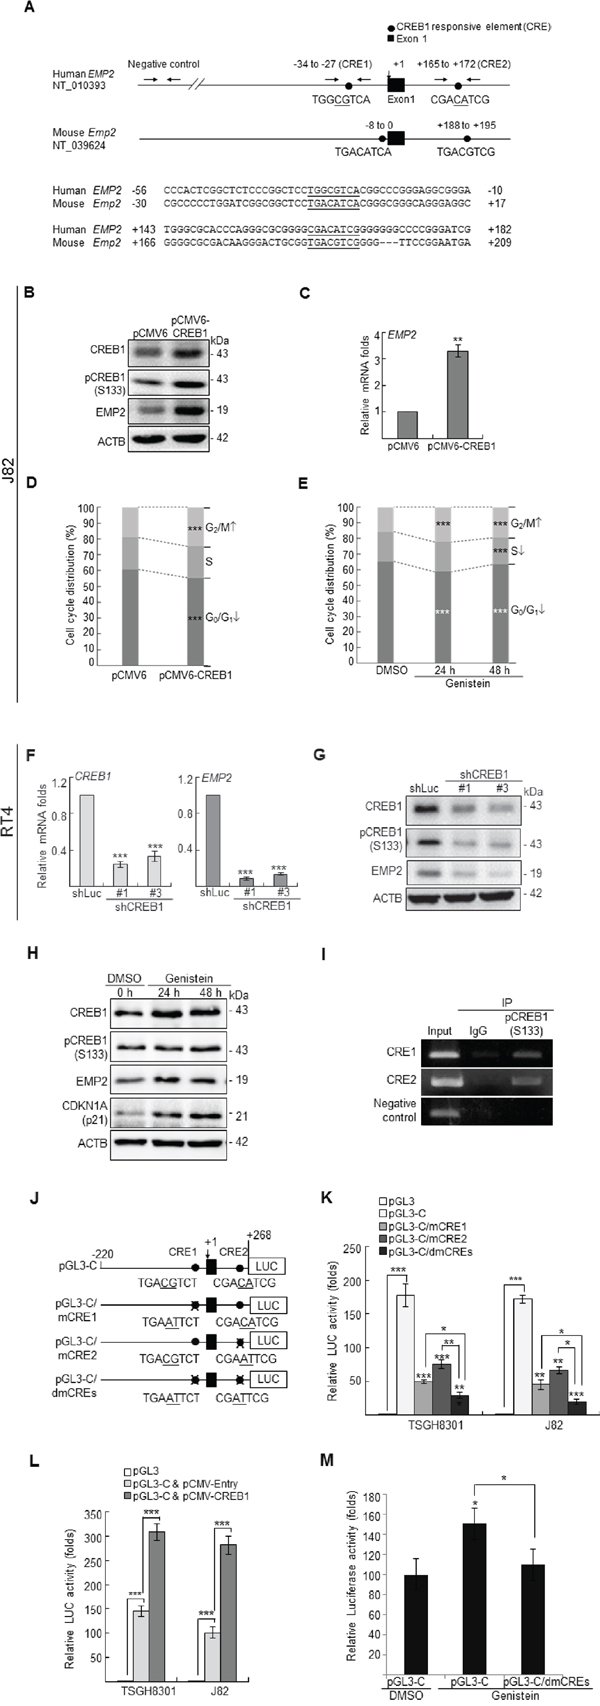 Genistein upregulated CREB1 and pCREB1(S133) protein levels, and pCREB1(Ser133) transactivates EMP2 gene in UBUC-derived cells.